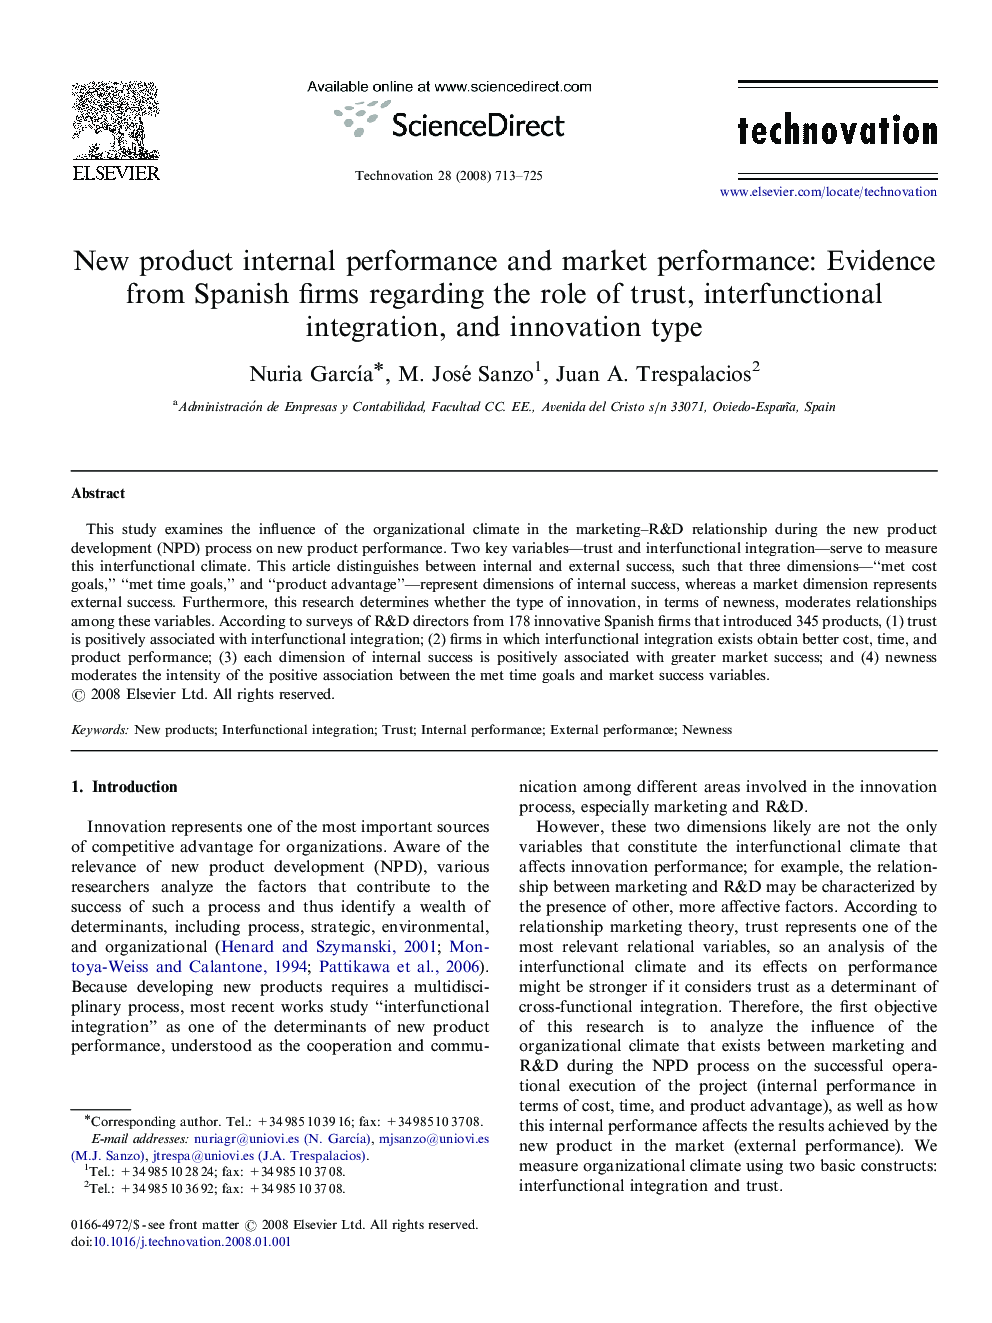 New product internal performance and market performance: Evidence from Spanish firms regarding the role of trust, interfunctional integration, and innovation type